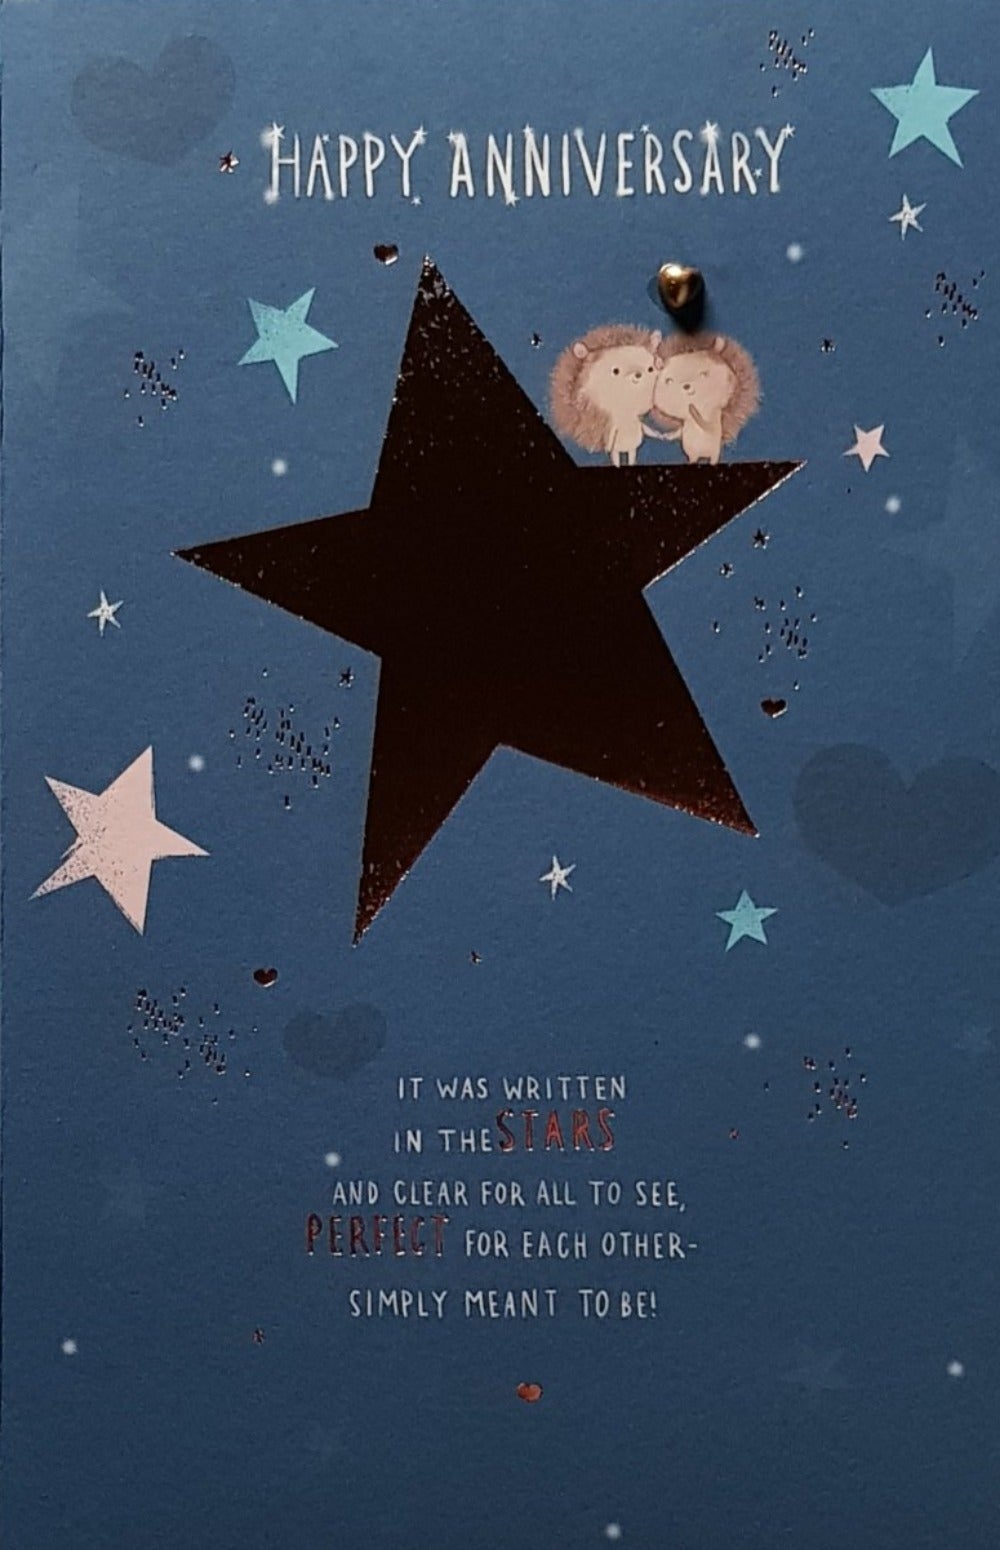 Anniversary Card - 'Ít Was Written In The Stars' & Two Hedgehogs Celebrating